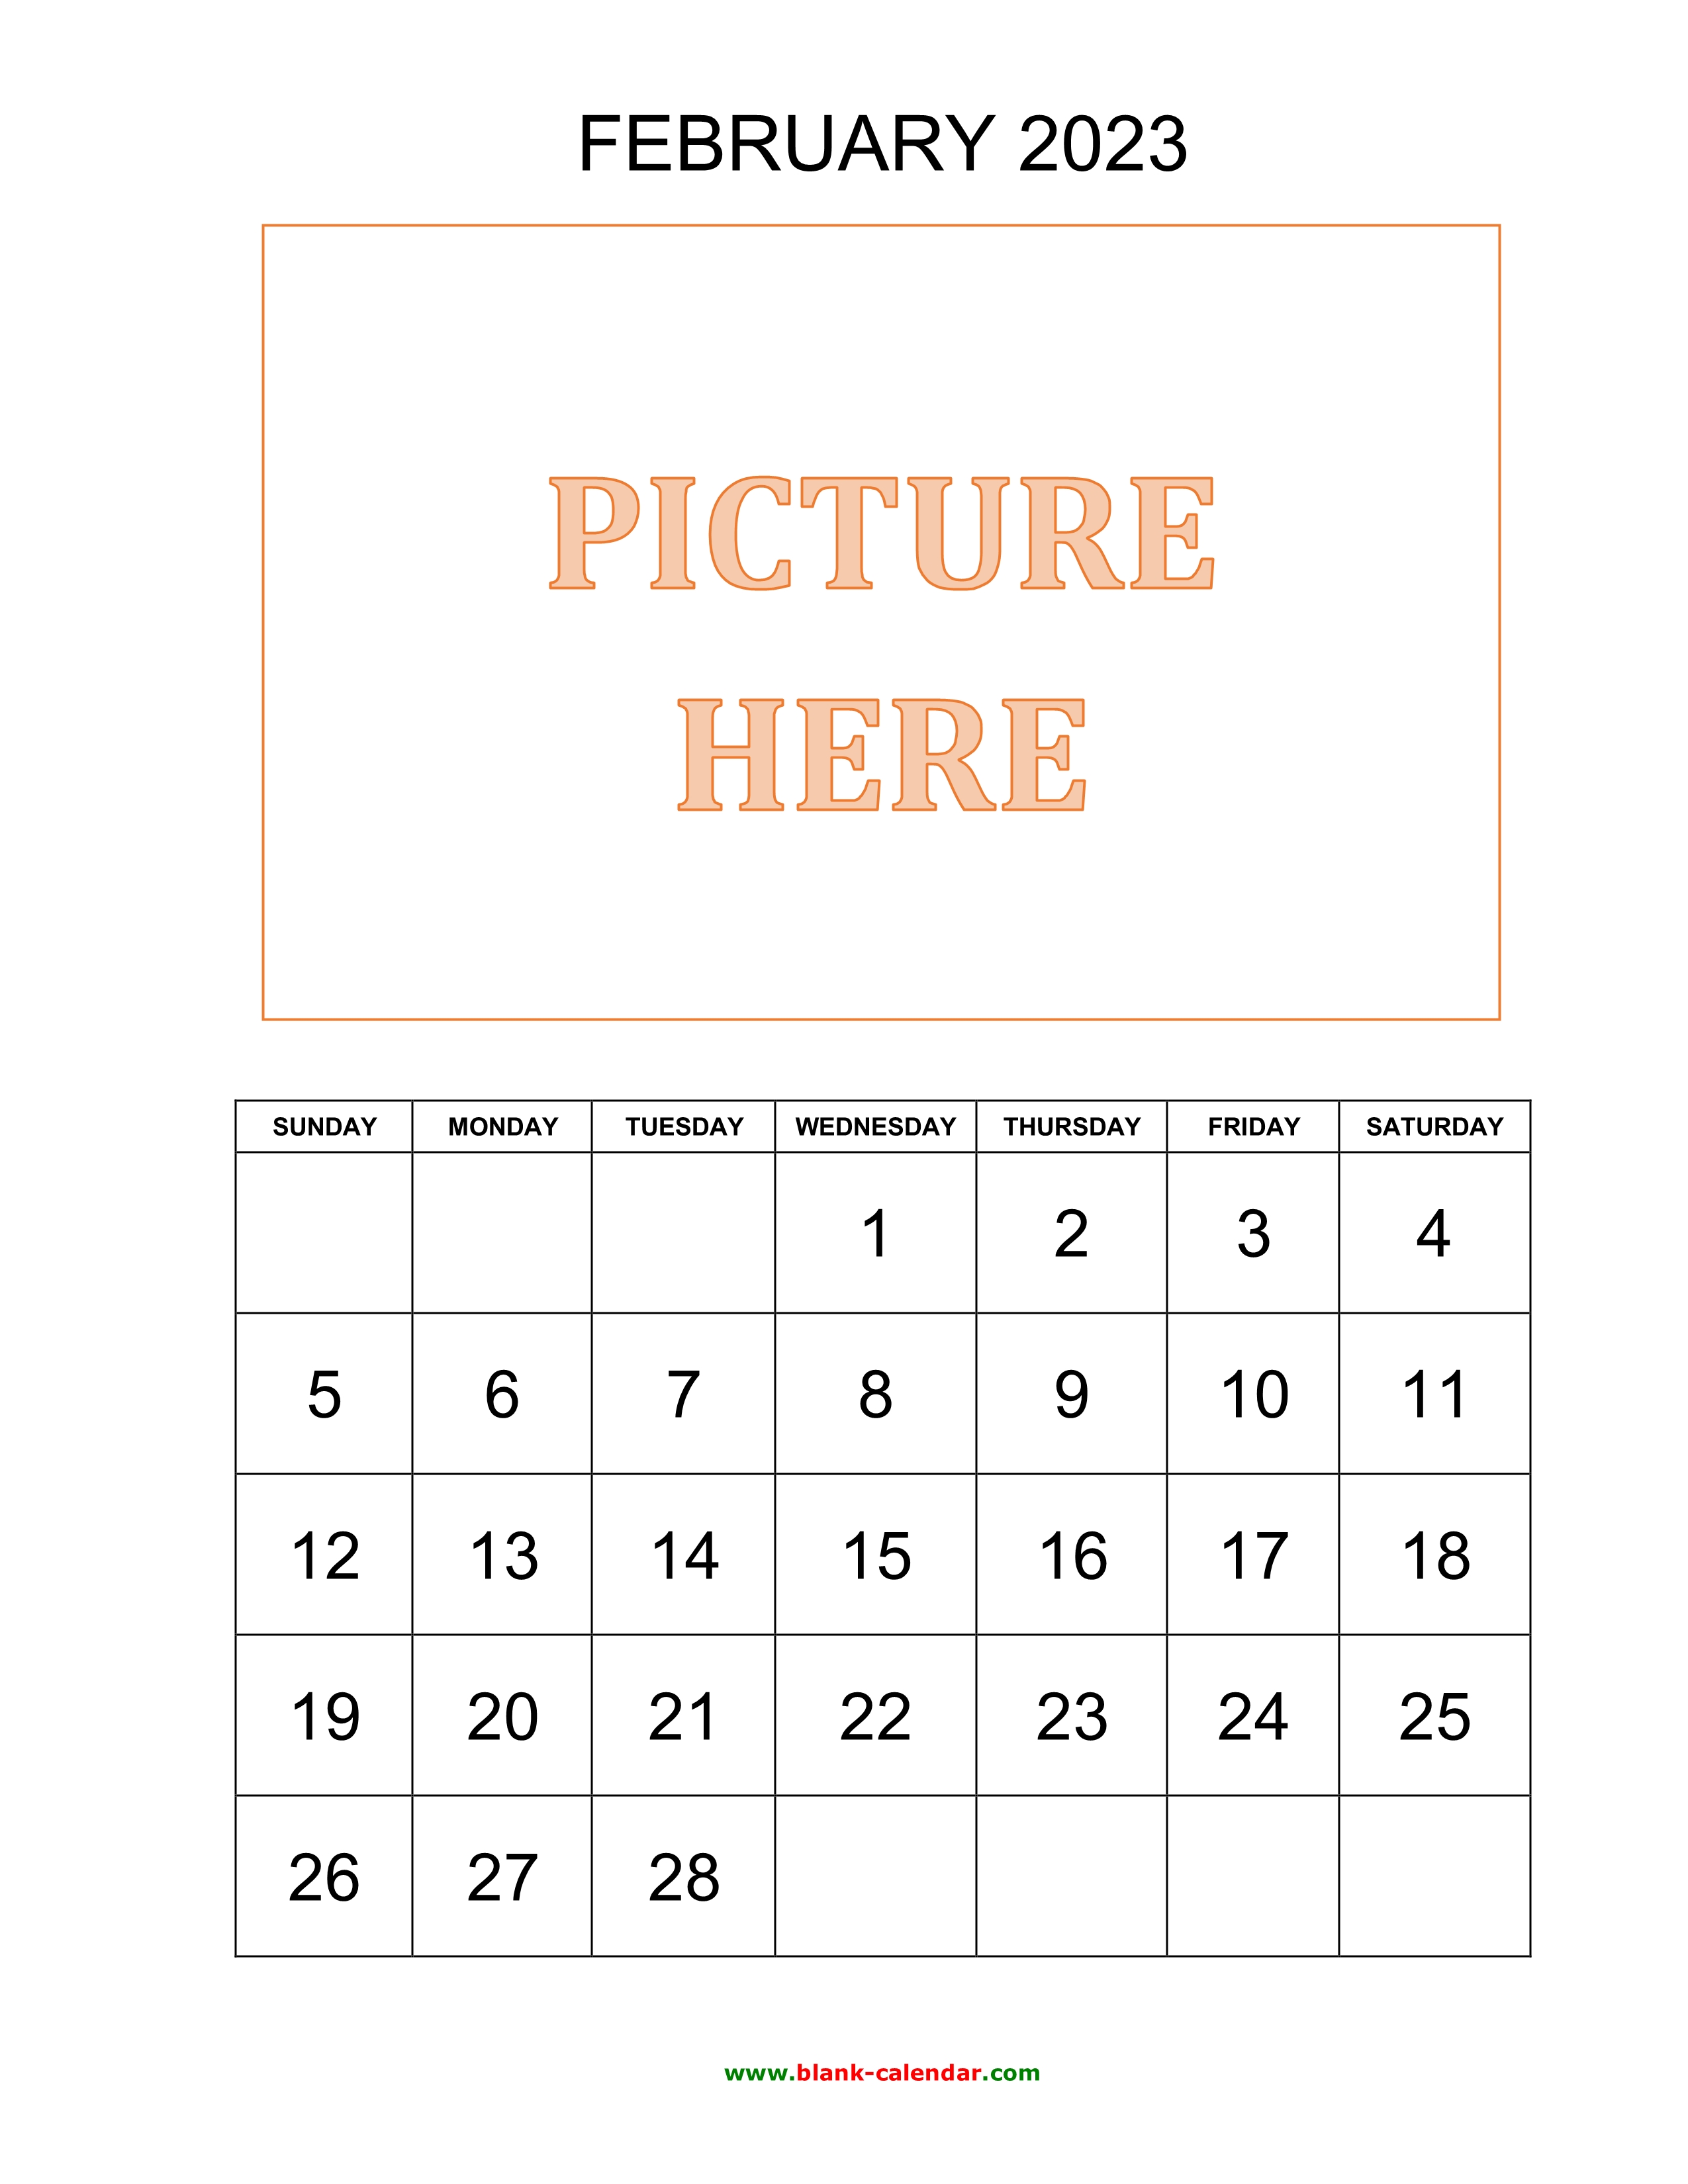 Free Download Printable February 2023 Calendar, picture can be placed